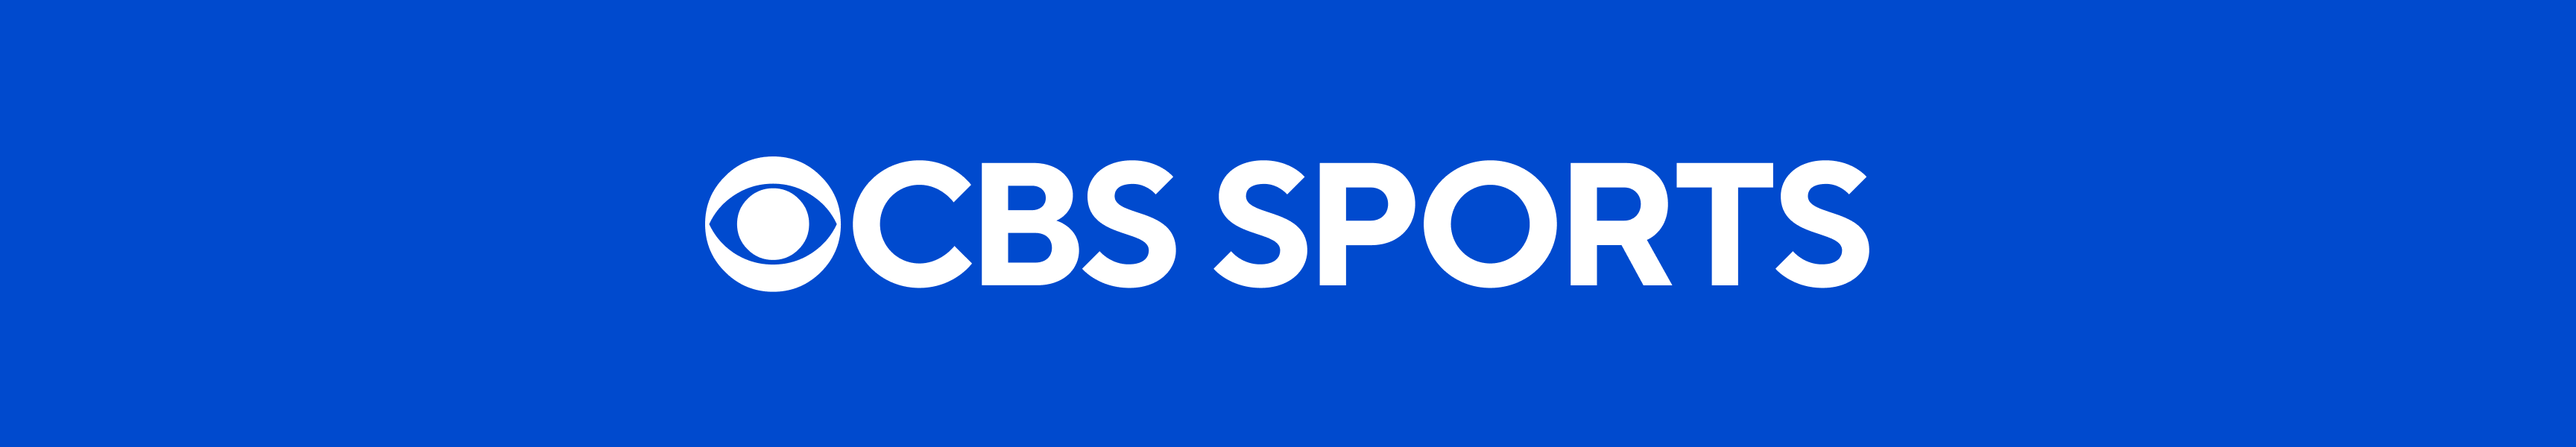 CBS Sports Home & Office